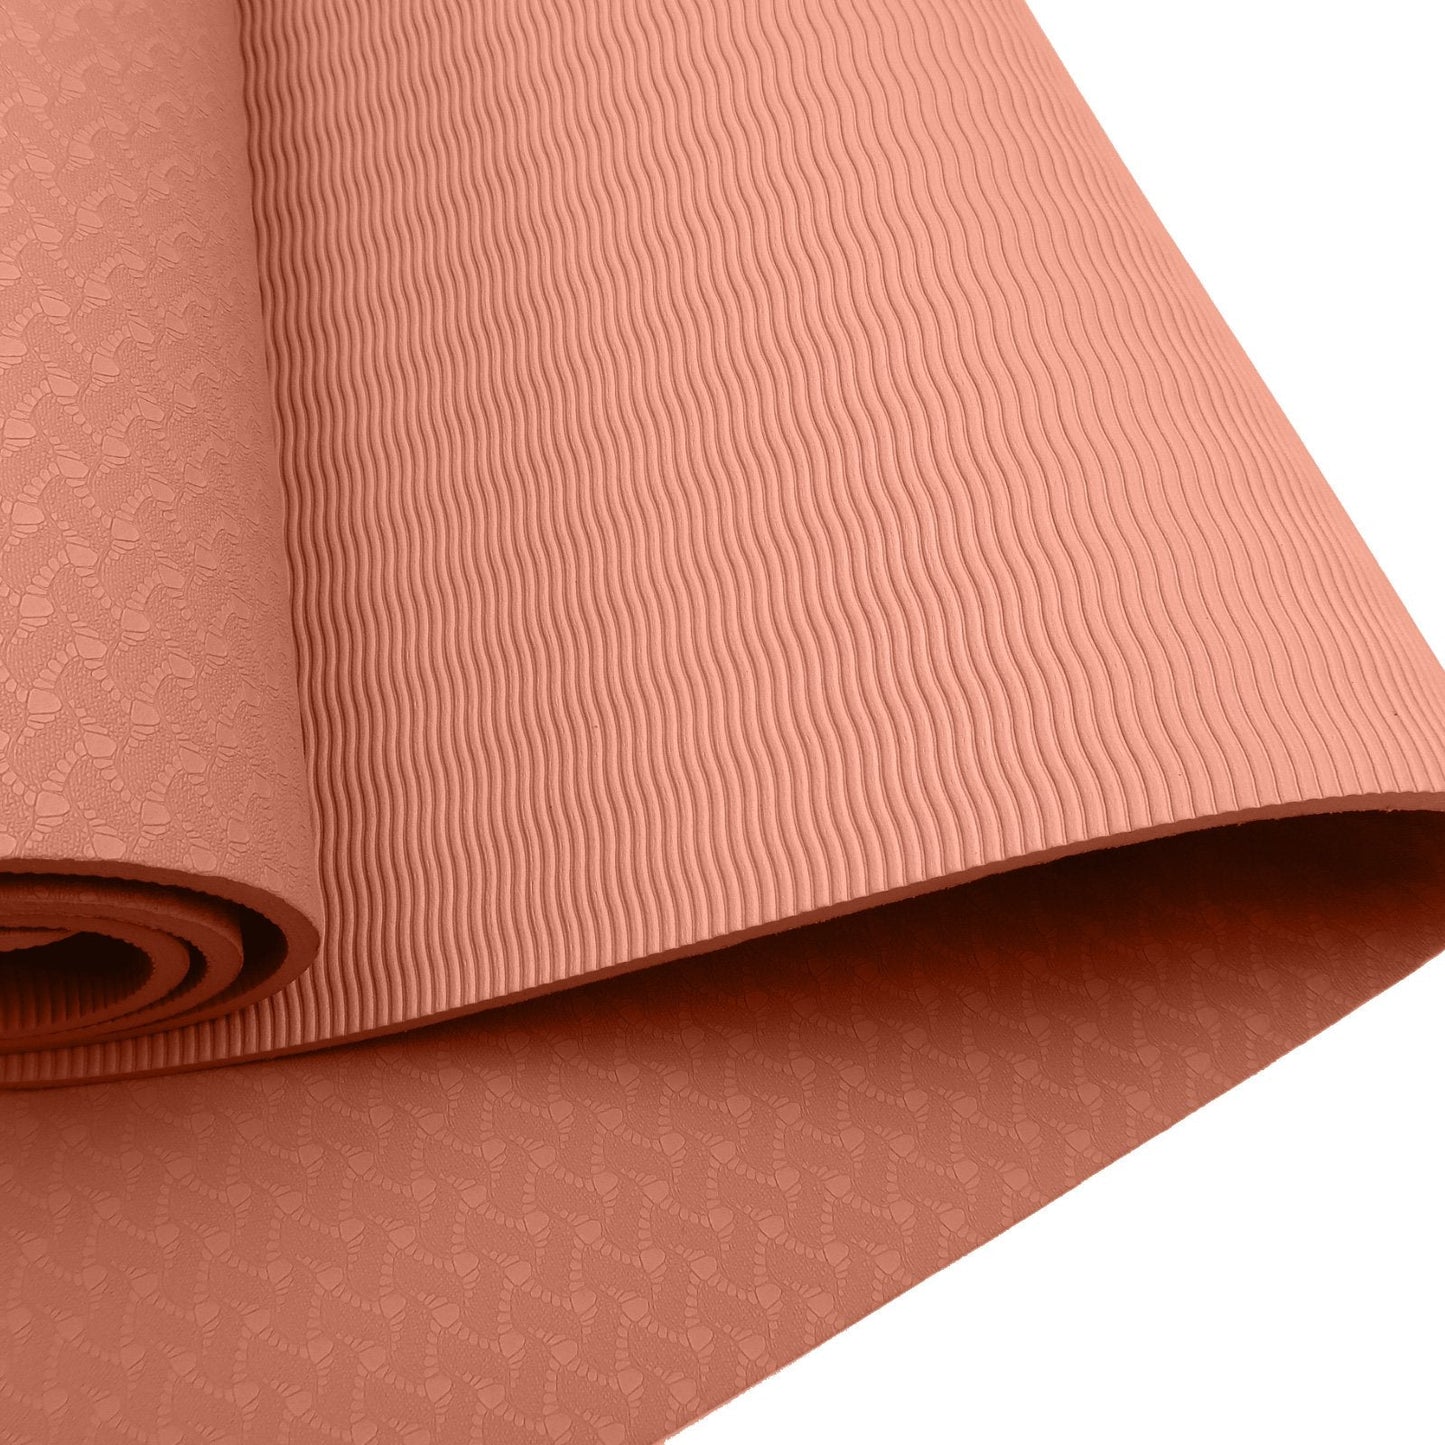 Sports & Fitness > Fitness Accessories - Powertrain Eco-friendly Dual Layer 6mm Yoga Mat | Peach | Non-slip Surface And Carry Strap For Ultimate Comfort And Portability